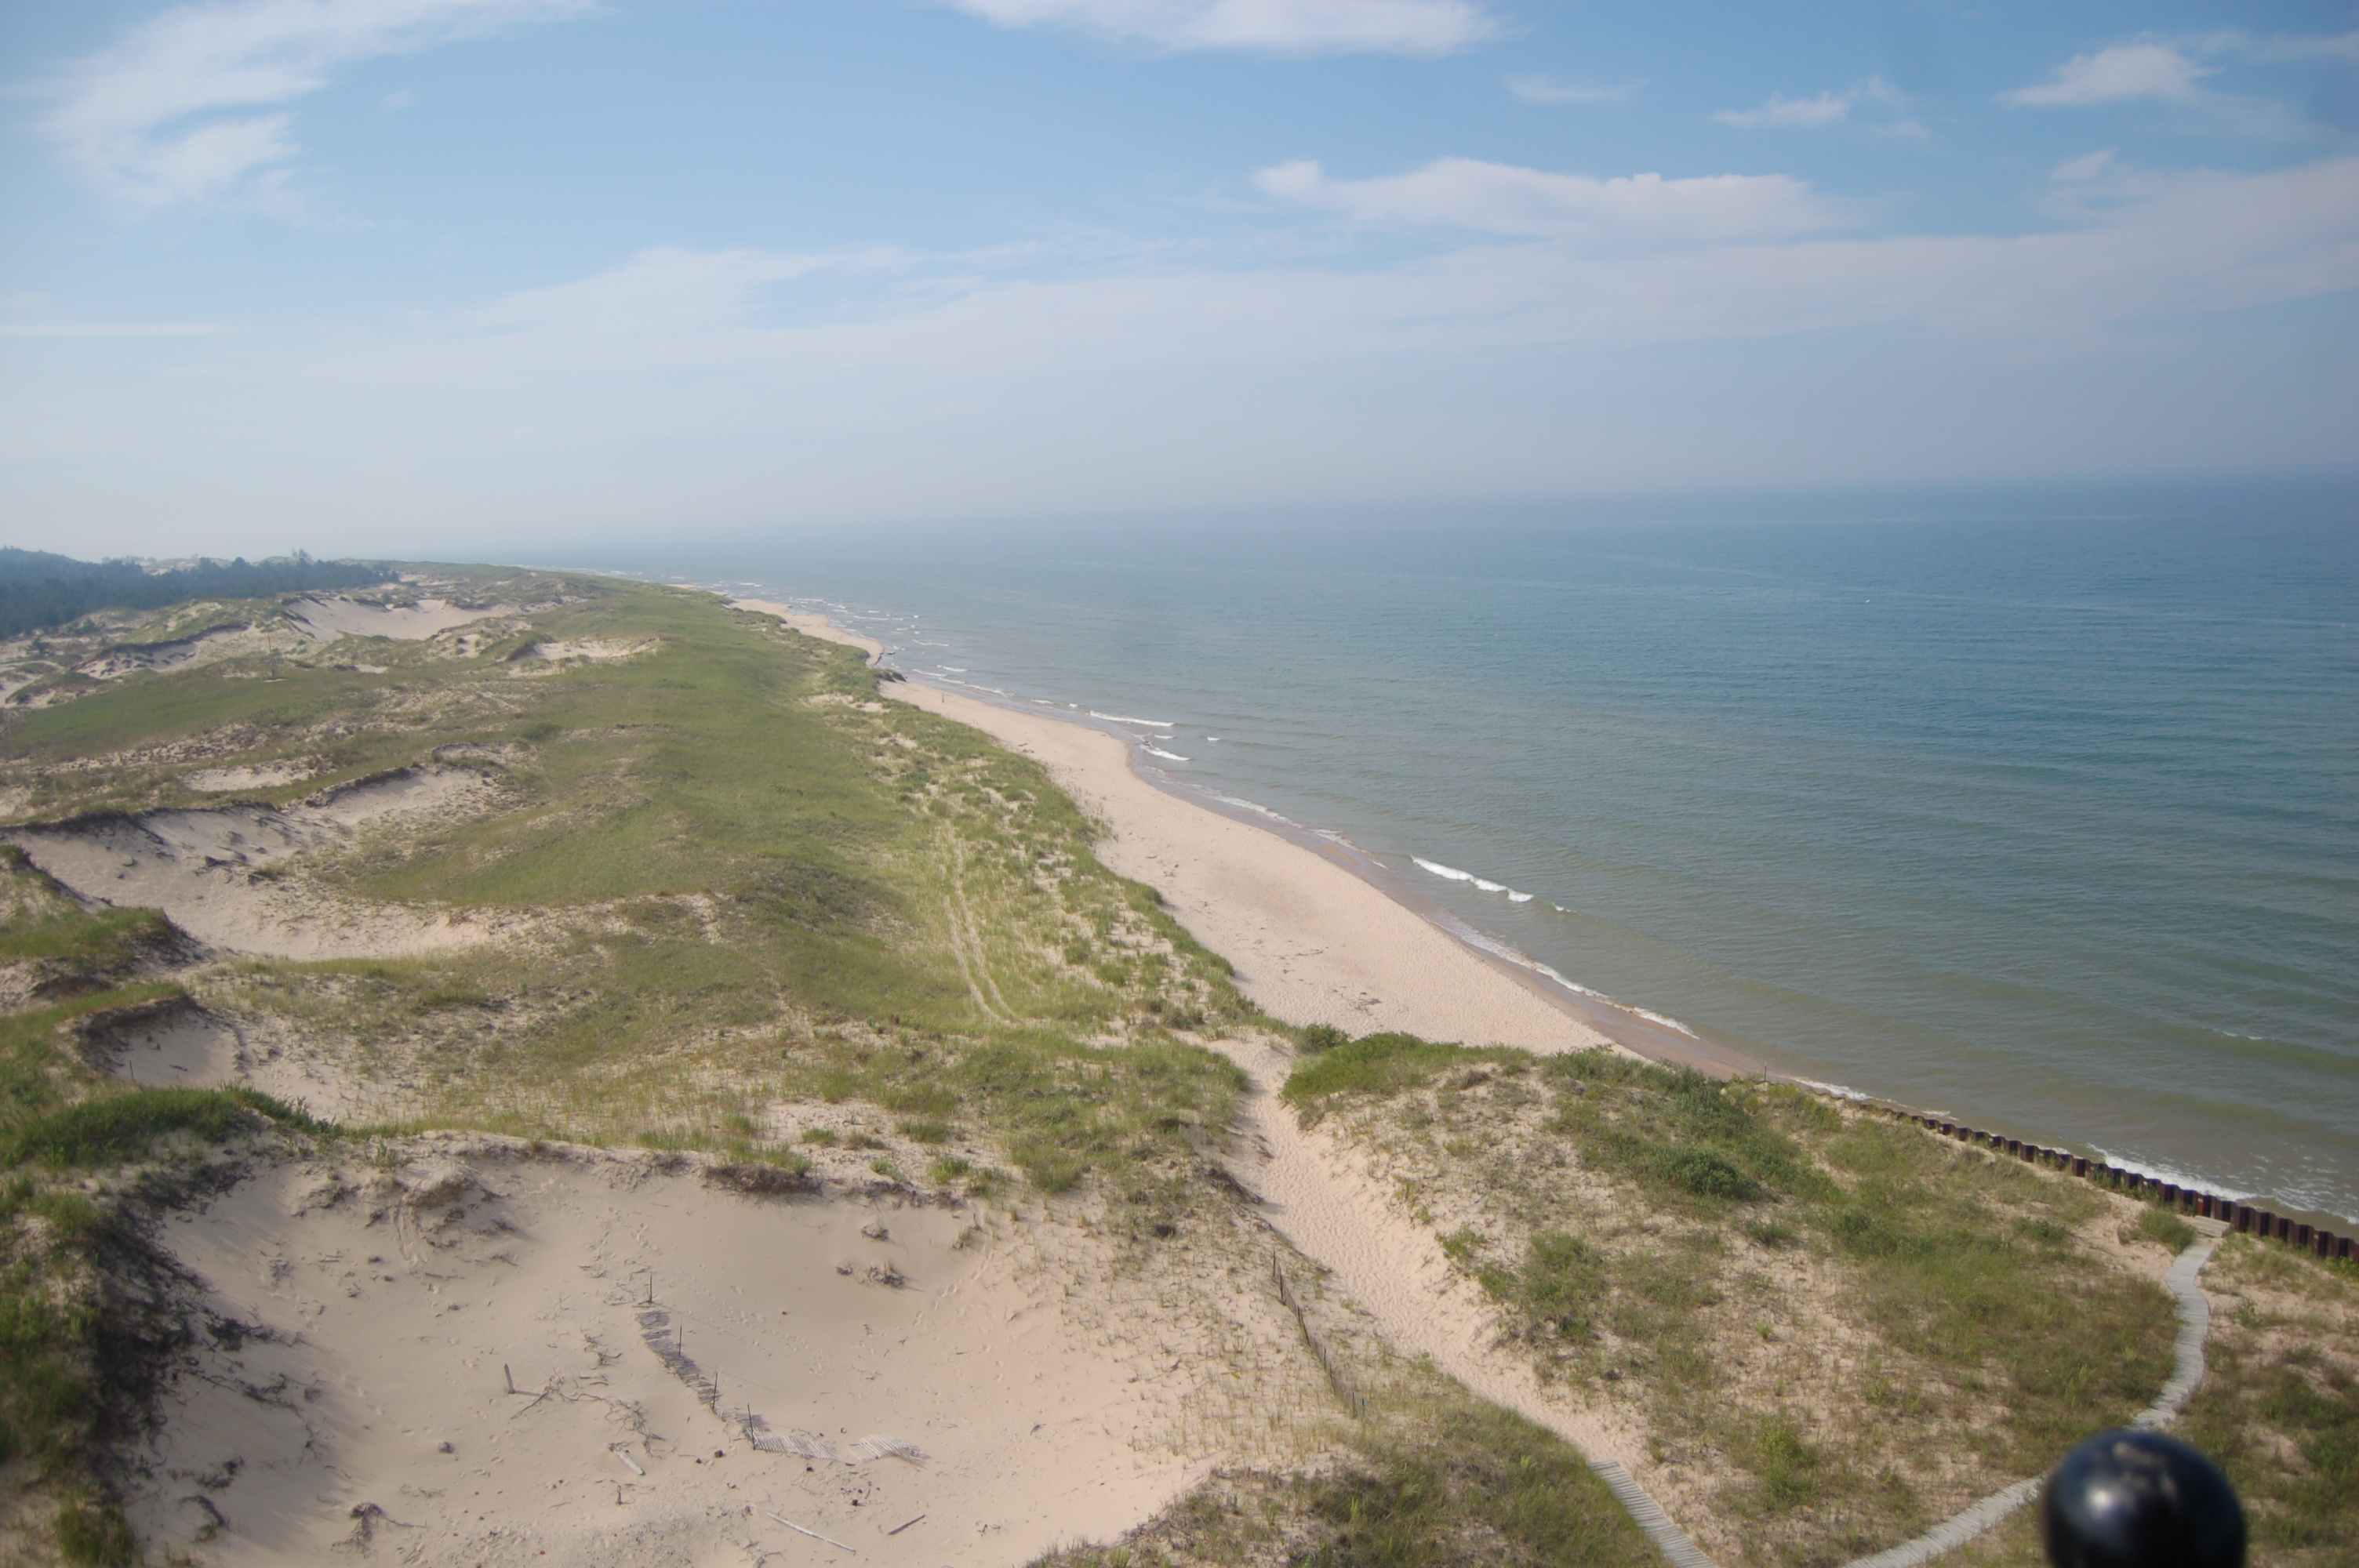 View of Lake Michigan shoreline from Big Sable Lighthouse tower